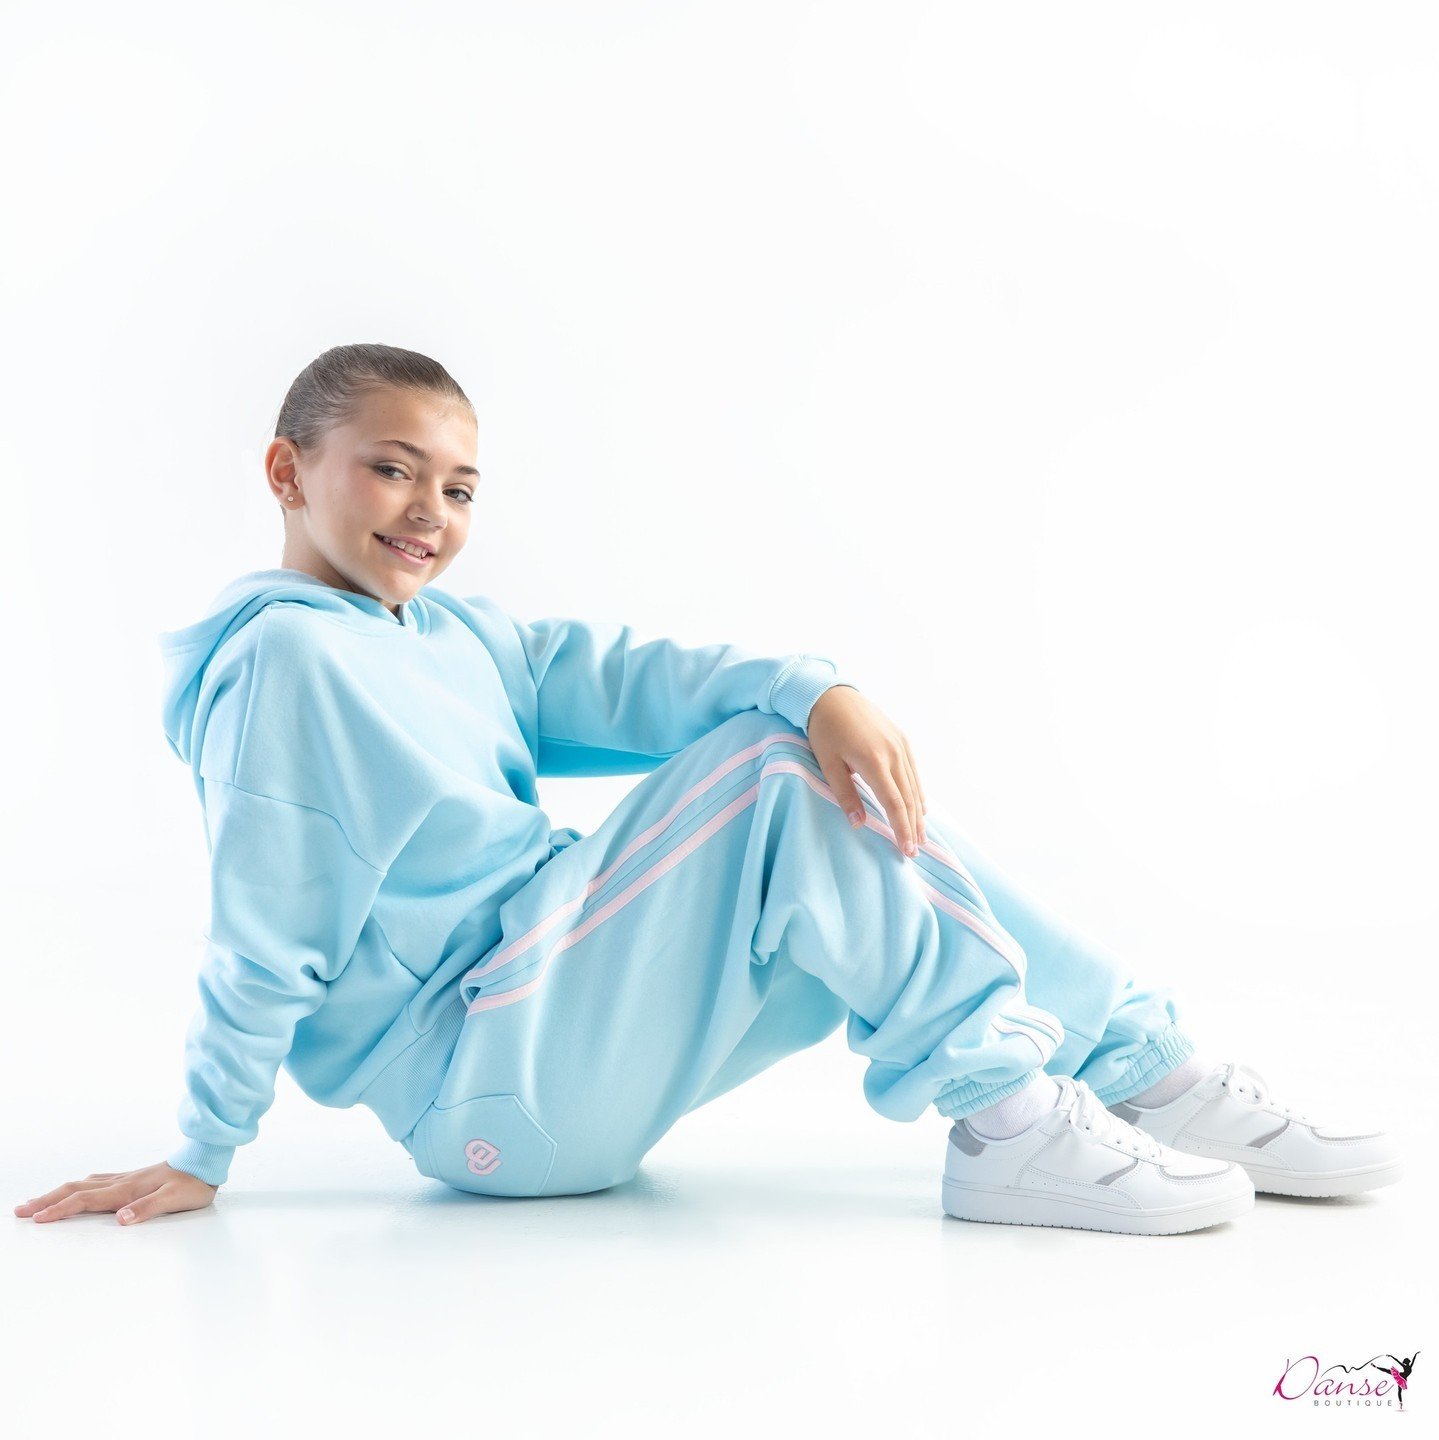 The Preppy Edit by @claudiadeancollections 💙⁠
The tracksuit of the season!⁠
⁠
📸 @yellowwood.photography⁠
#tracksuit #warmup #cozy #dancewear